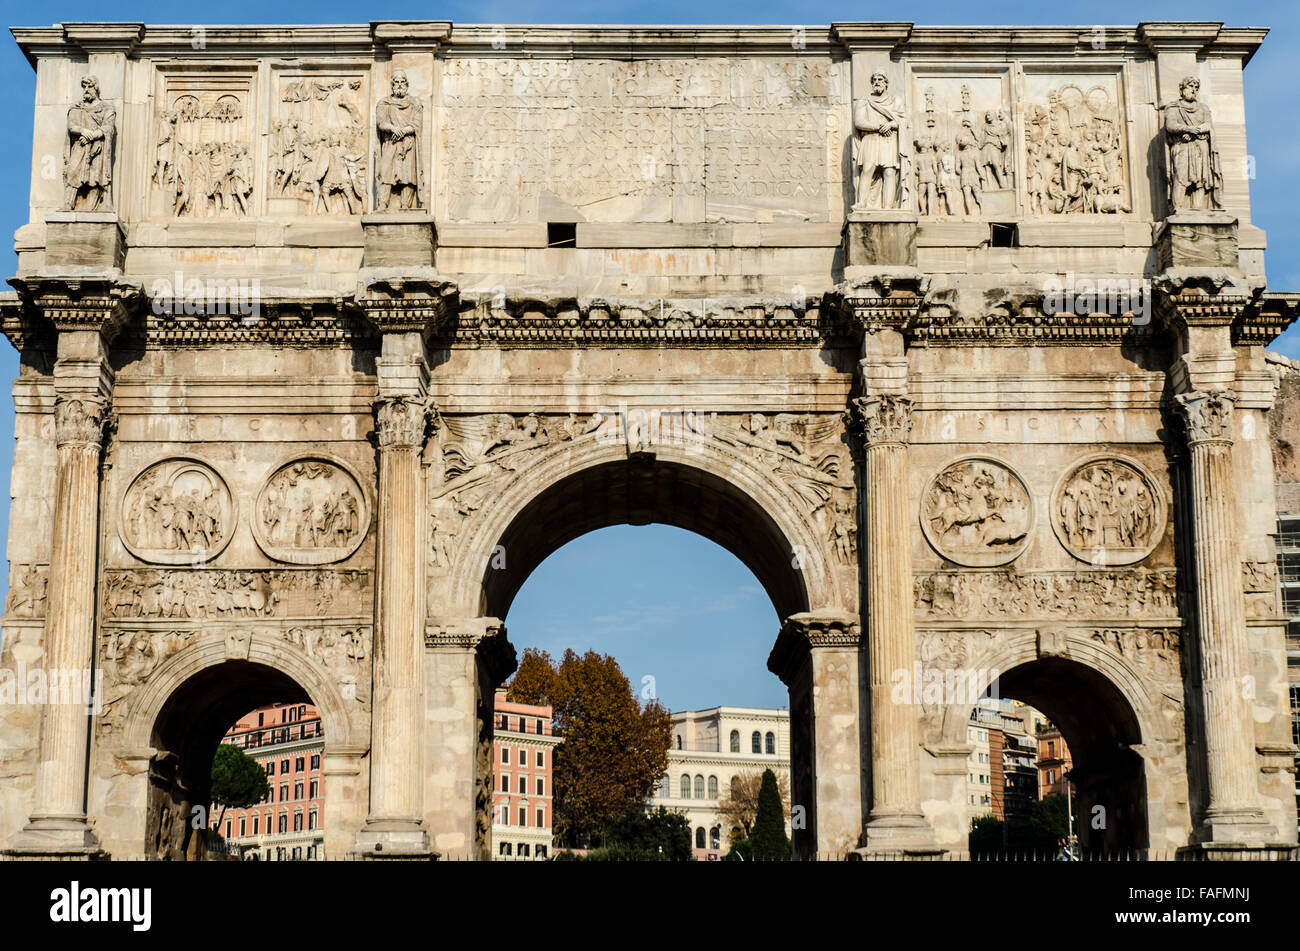 The Arch of Constantine is a triumphal arch in Rome, situated between the Colosseum and the Palatine Hill. Stock Photo